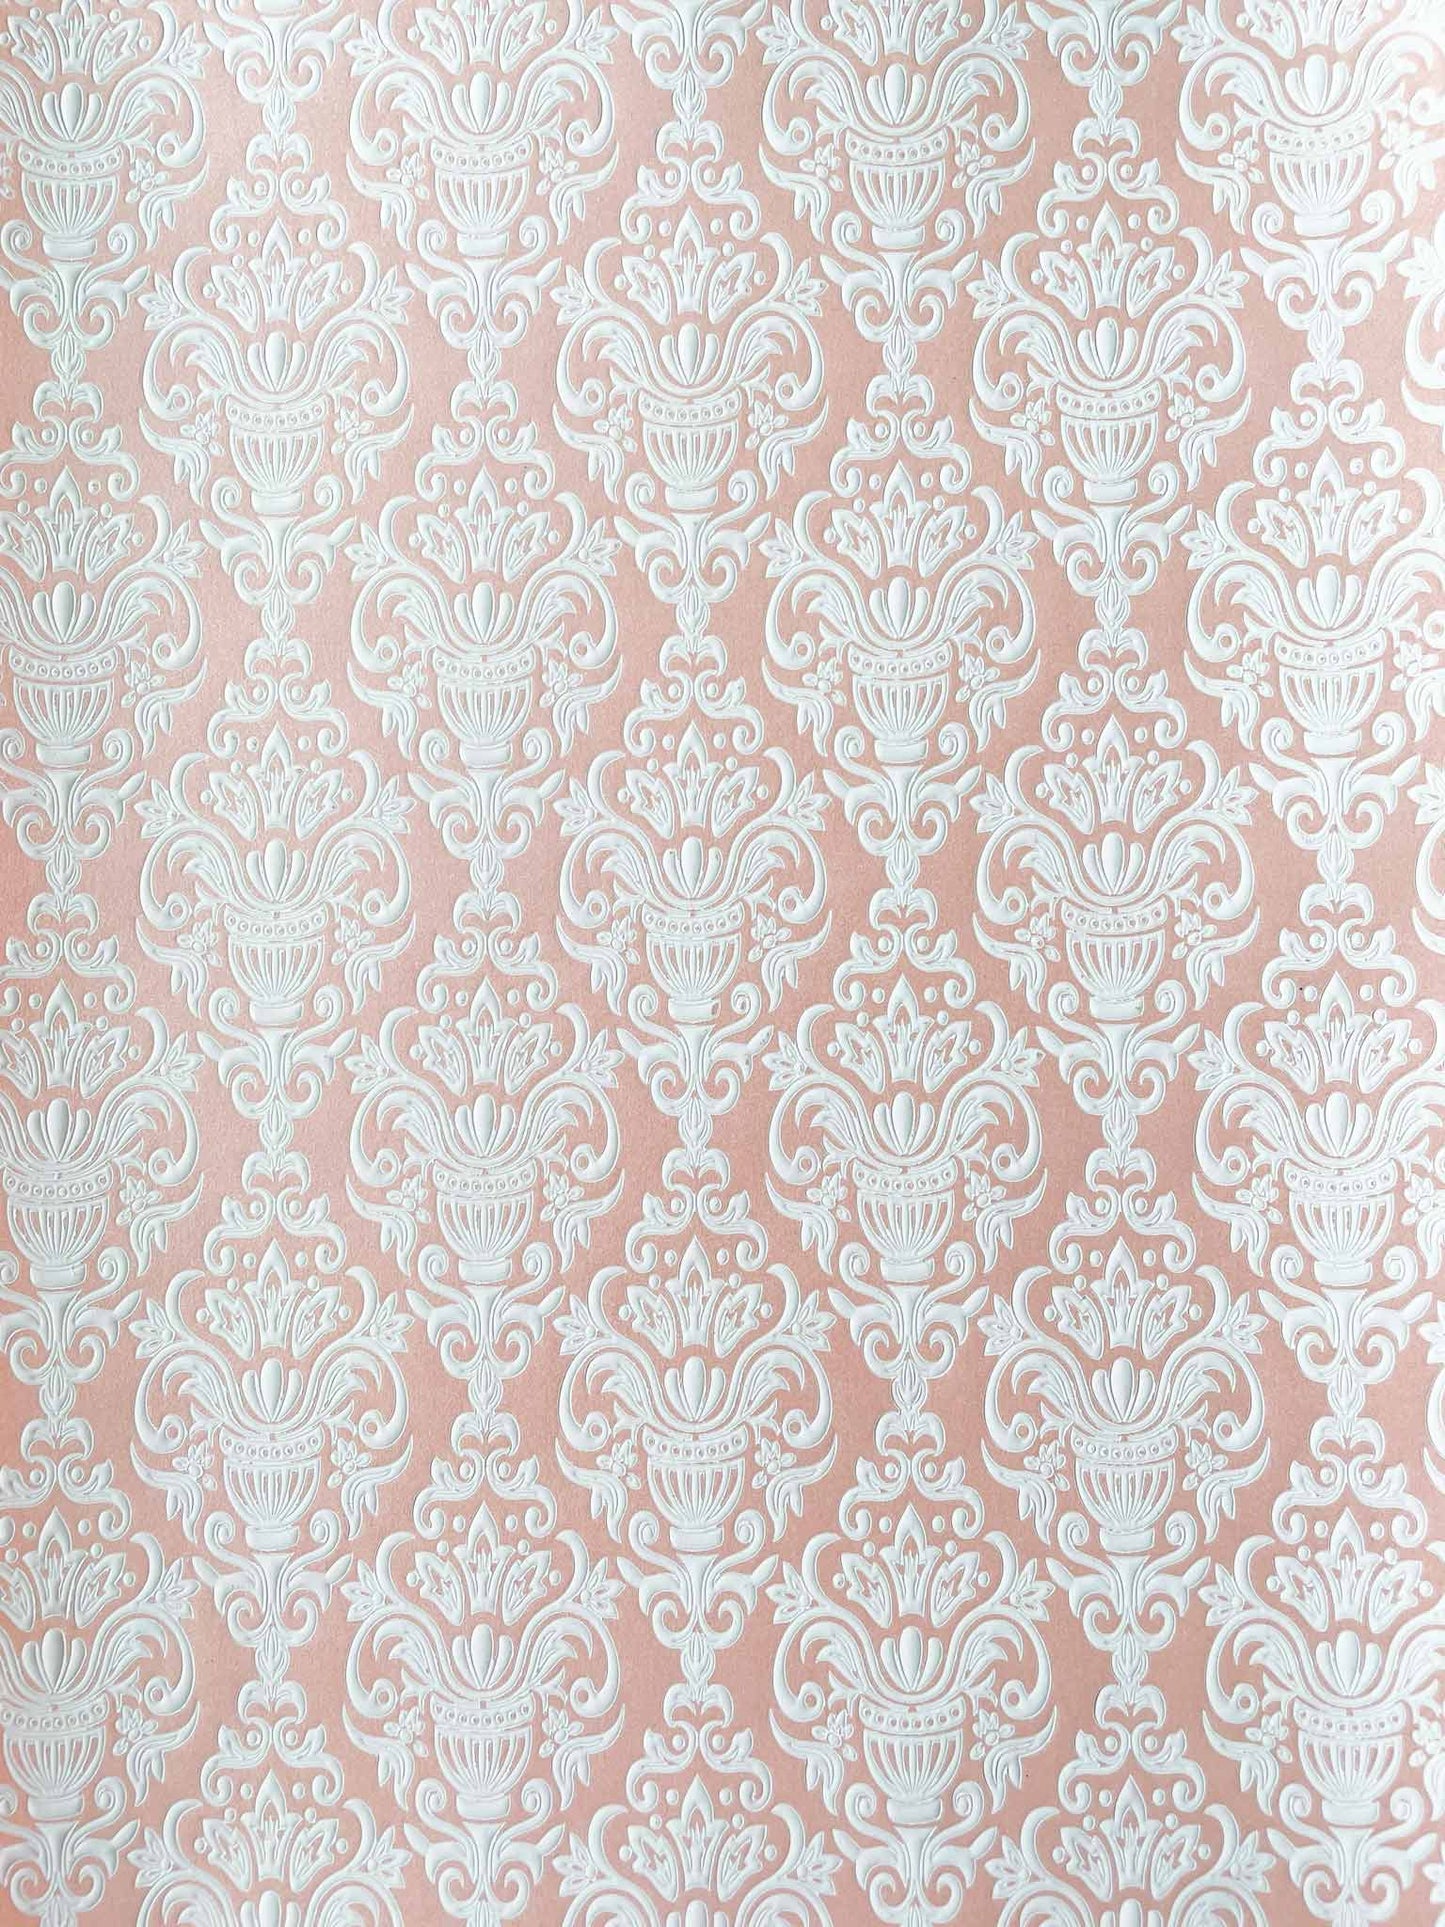 Antoinette Embossed Paper in Pink and White  ImagineDIY   